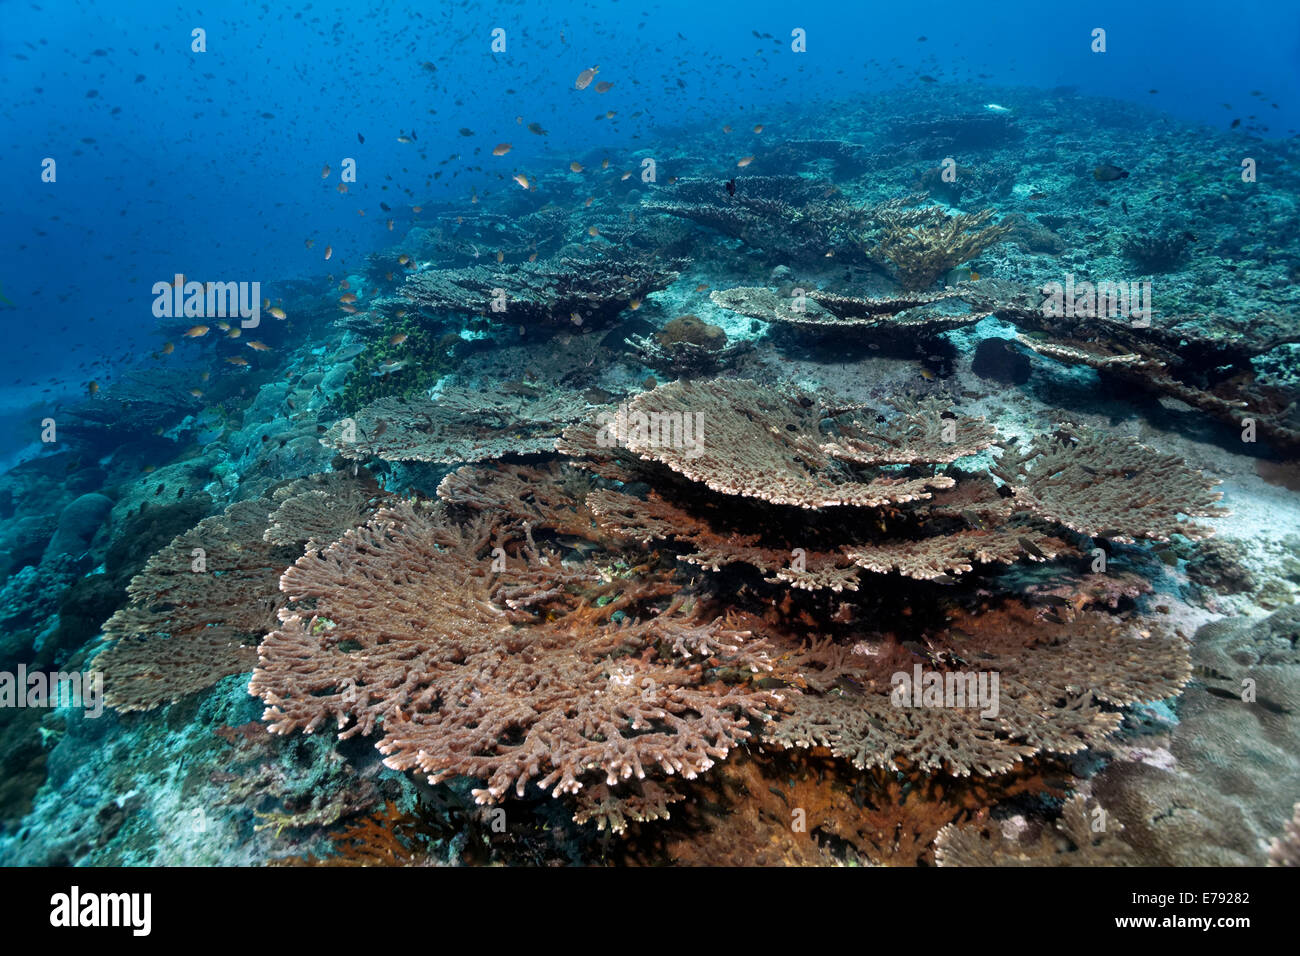 Top reef with terraced Acropora corals (Acropora sp.) and various types of damselfish (Pomacentridae) Stock Photo